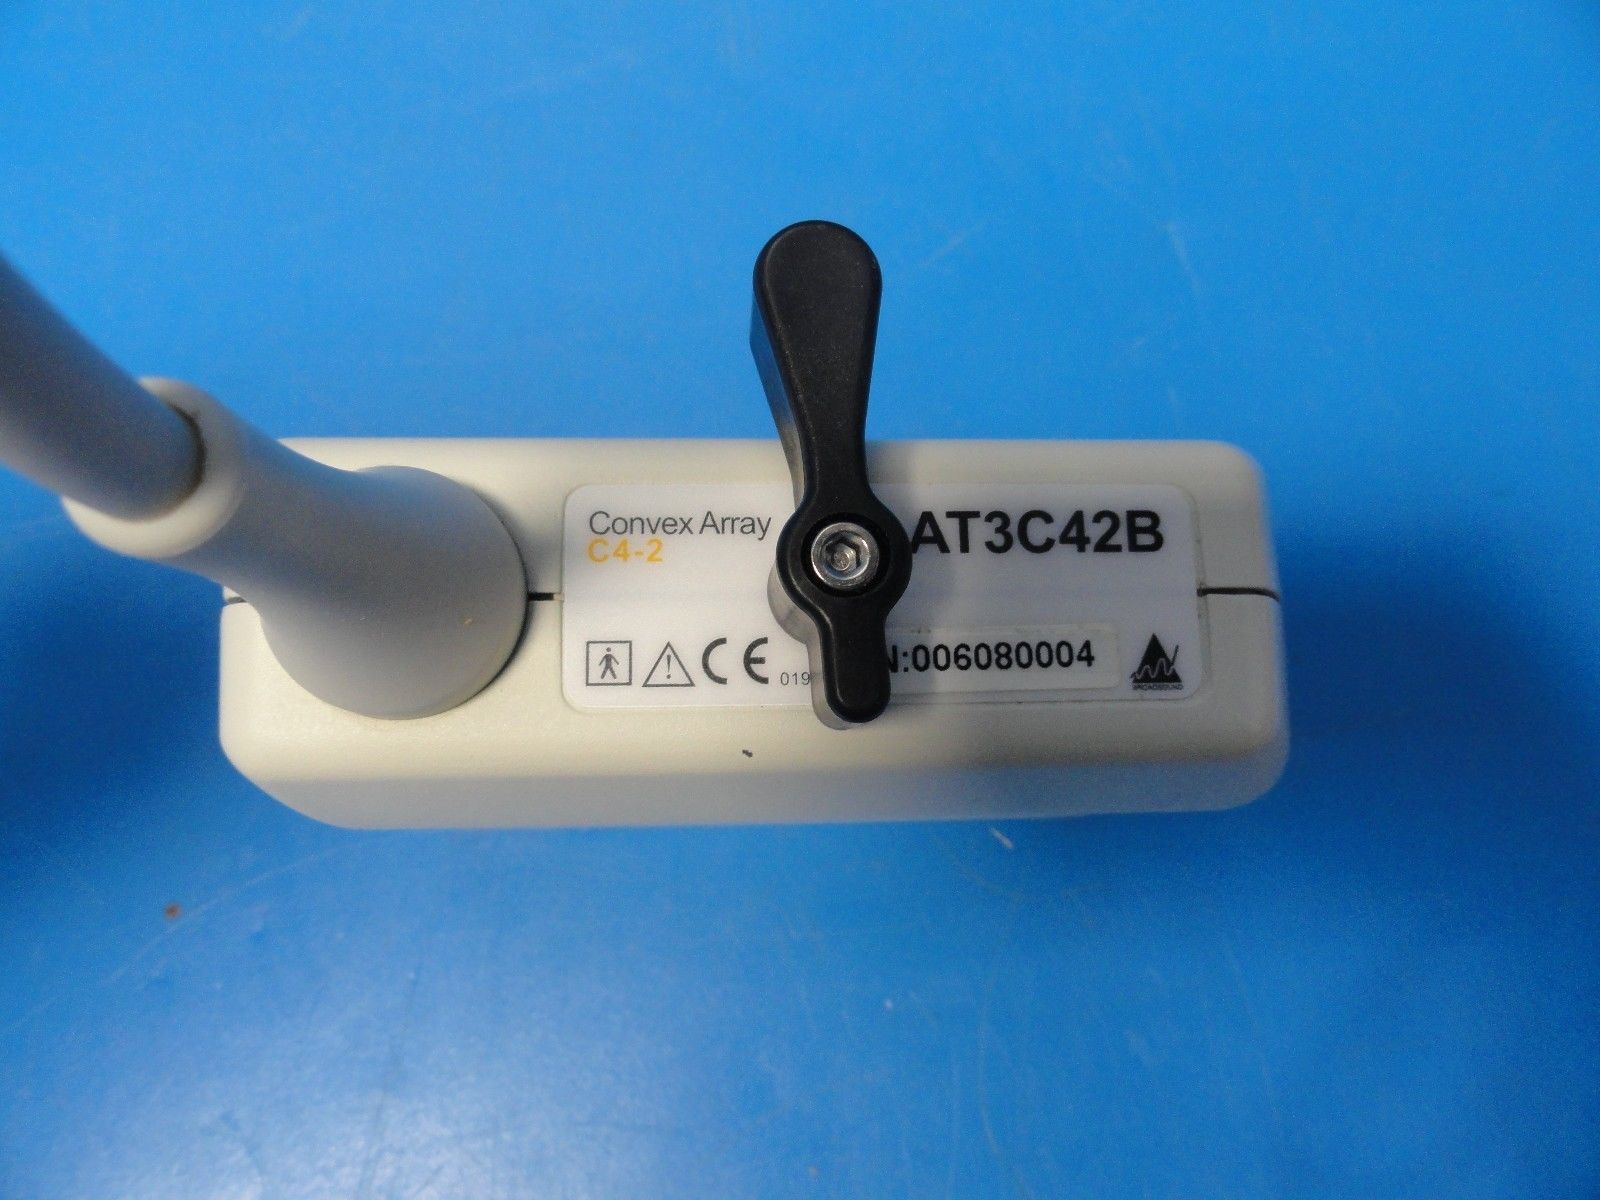 ATL AT3C42B / C4-2 Curved Array Broadband Probe (Abdominal OB/GYN General )6853 DIAGNOSTIC ULTRASOUND MACHINES FOR SALE